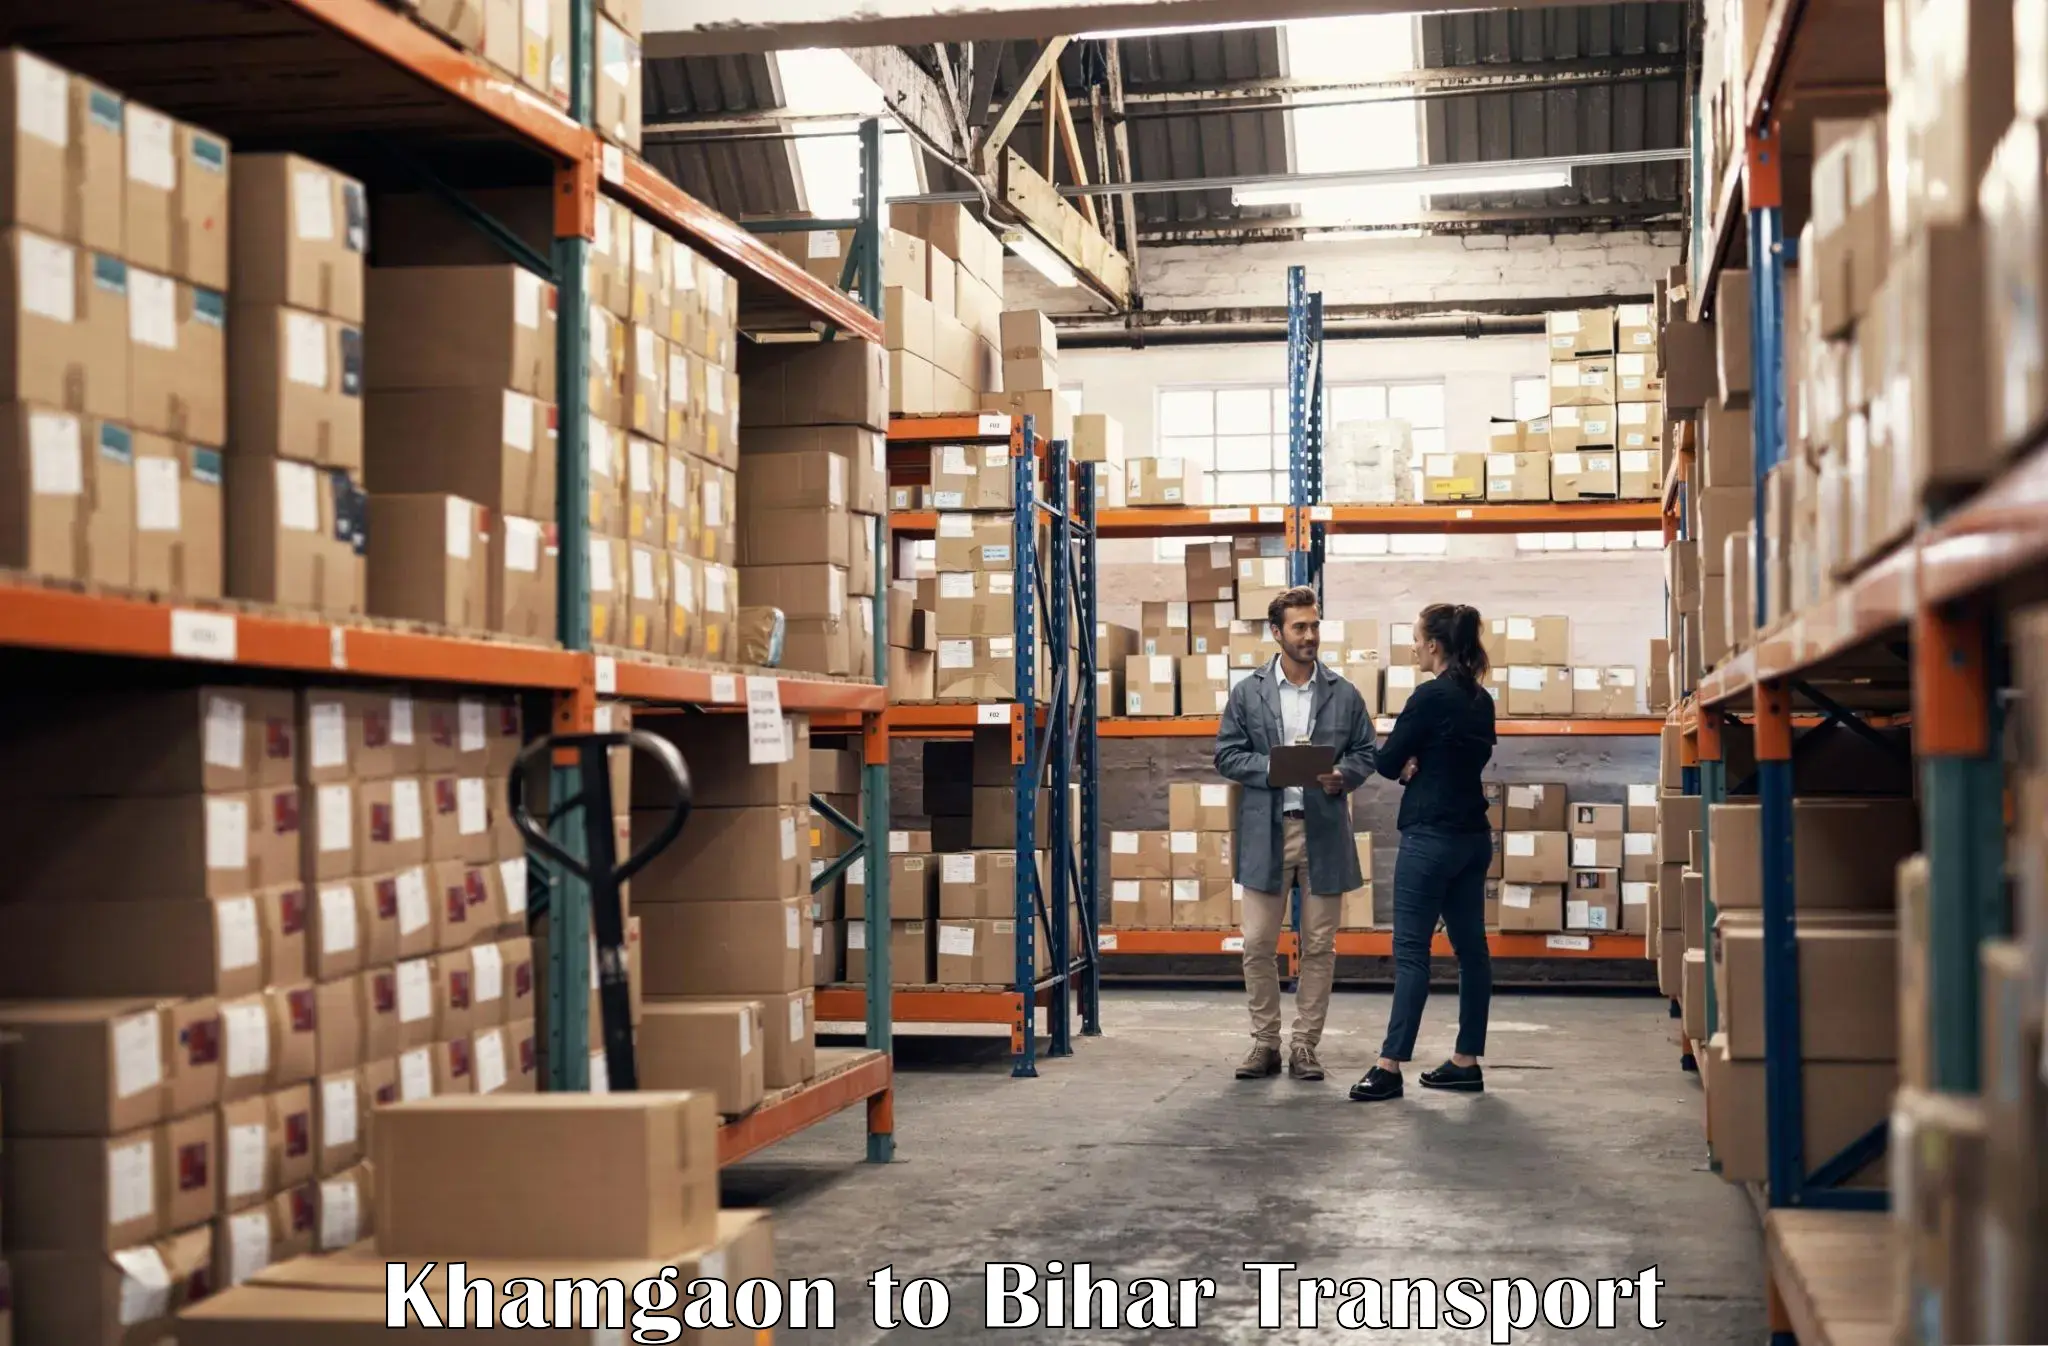 Furniture transport service in Khamgaon to Mohammadpur